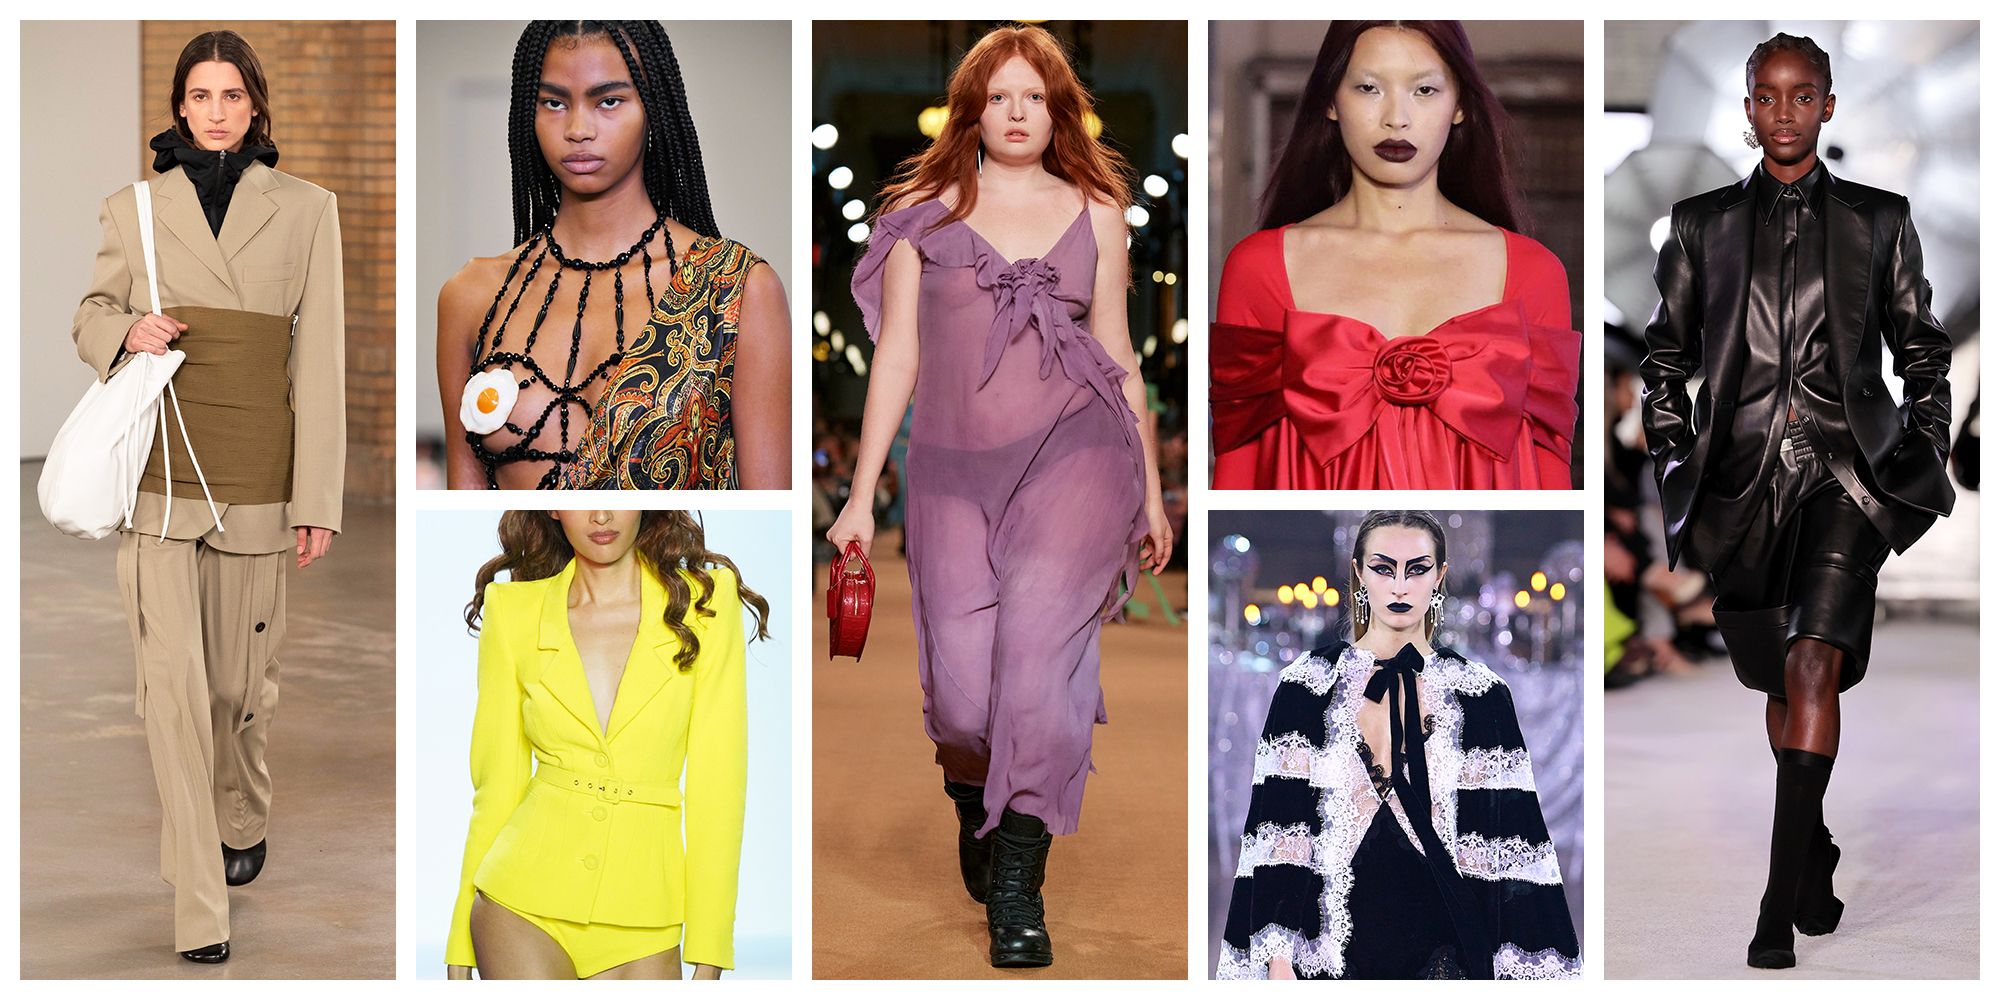 s Guide to the Biggest Fashion Trends of Spring 2019